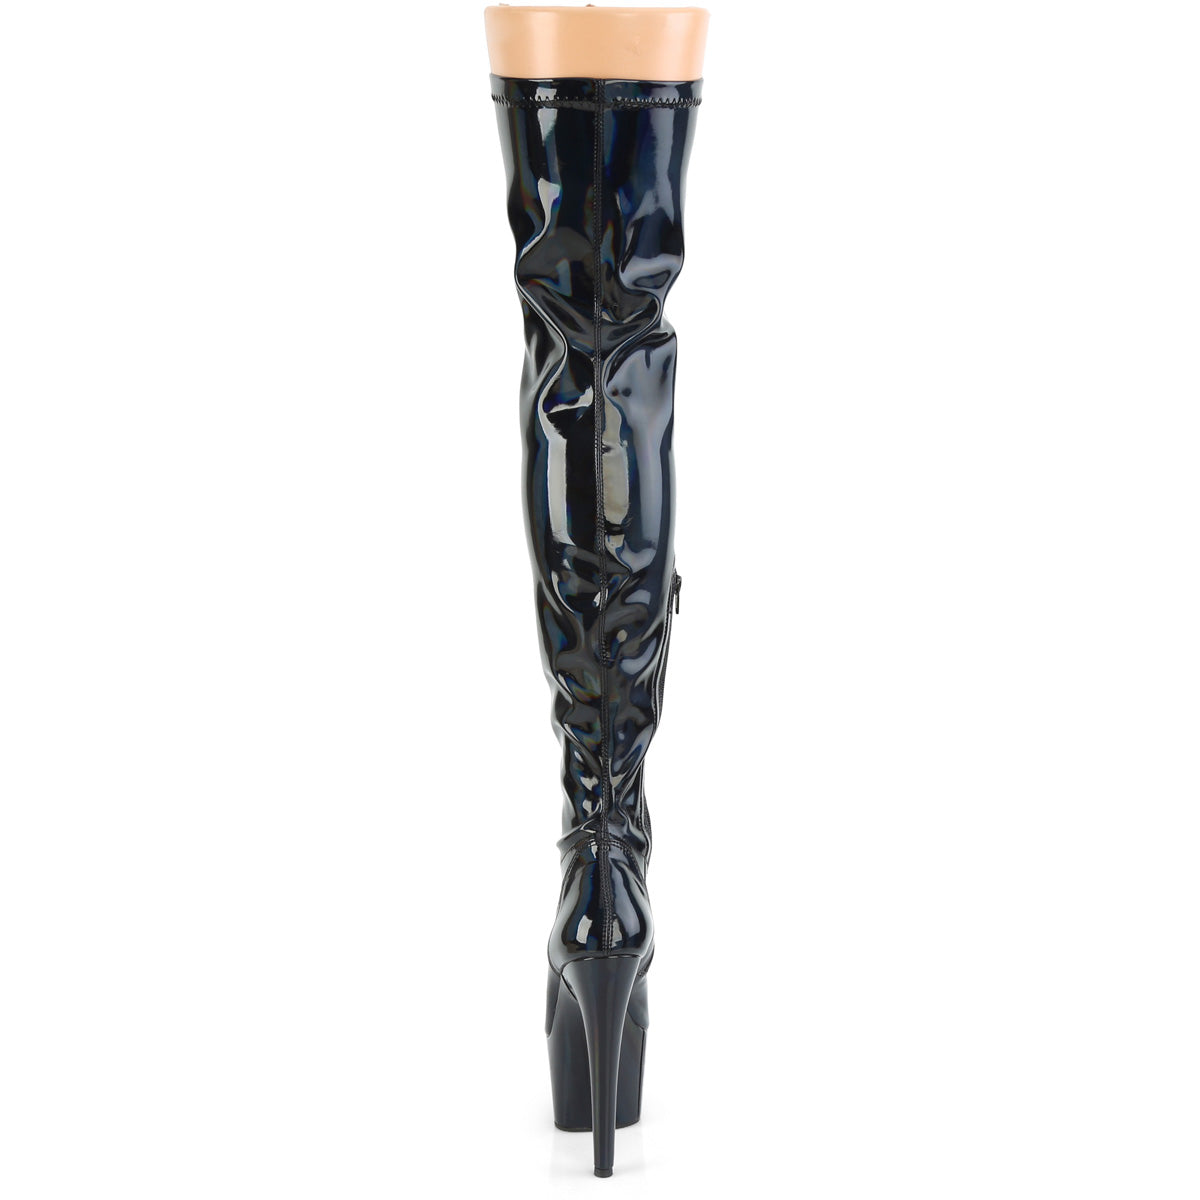 ADORE-3000HWR Pleaser 7" Heel Black Pole Dancing Thigh Highs-Pleaser- Sexy Shoes Fetish Footwear